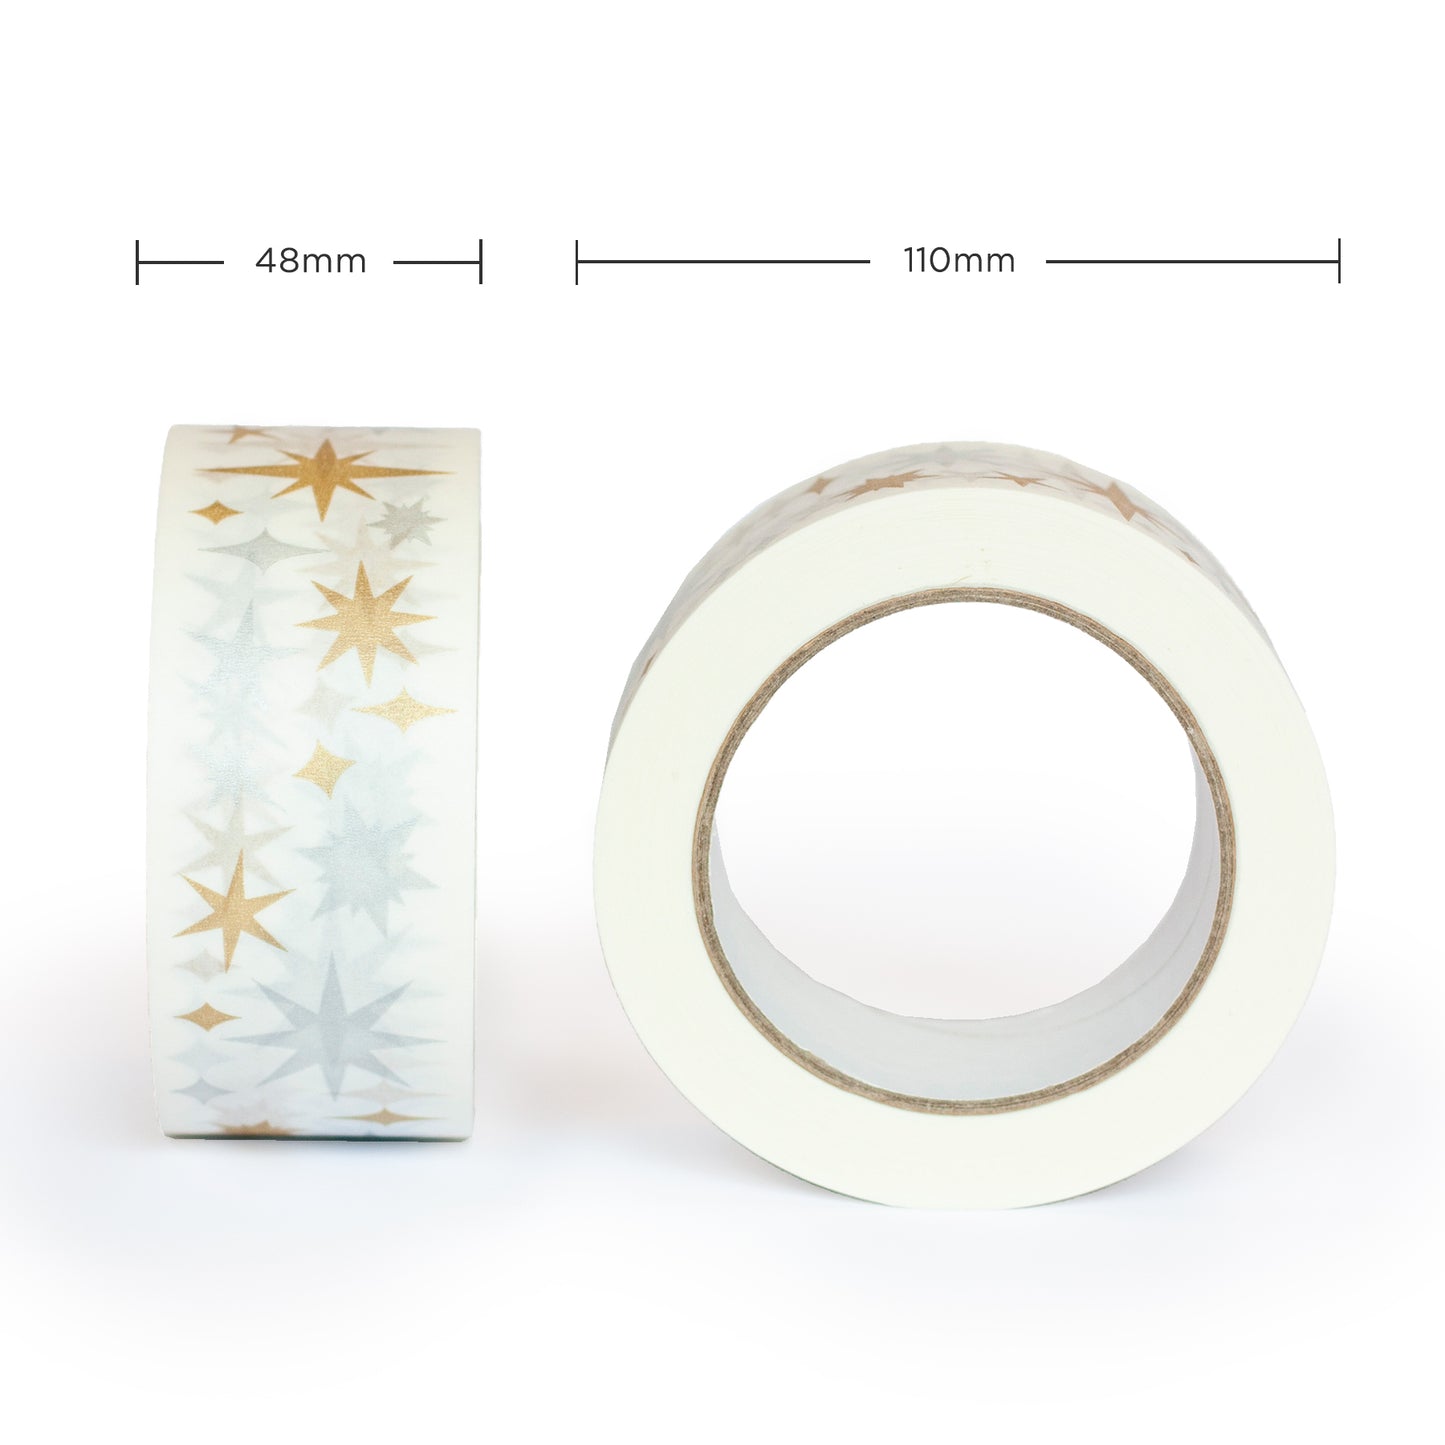 Christmas Decorative Paper Parcel Tape Star Print, 50m x 48mm. Recycled paper packing tape